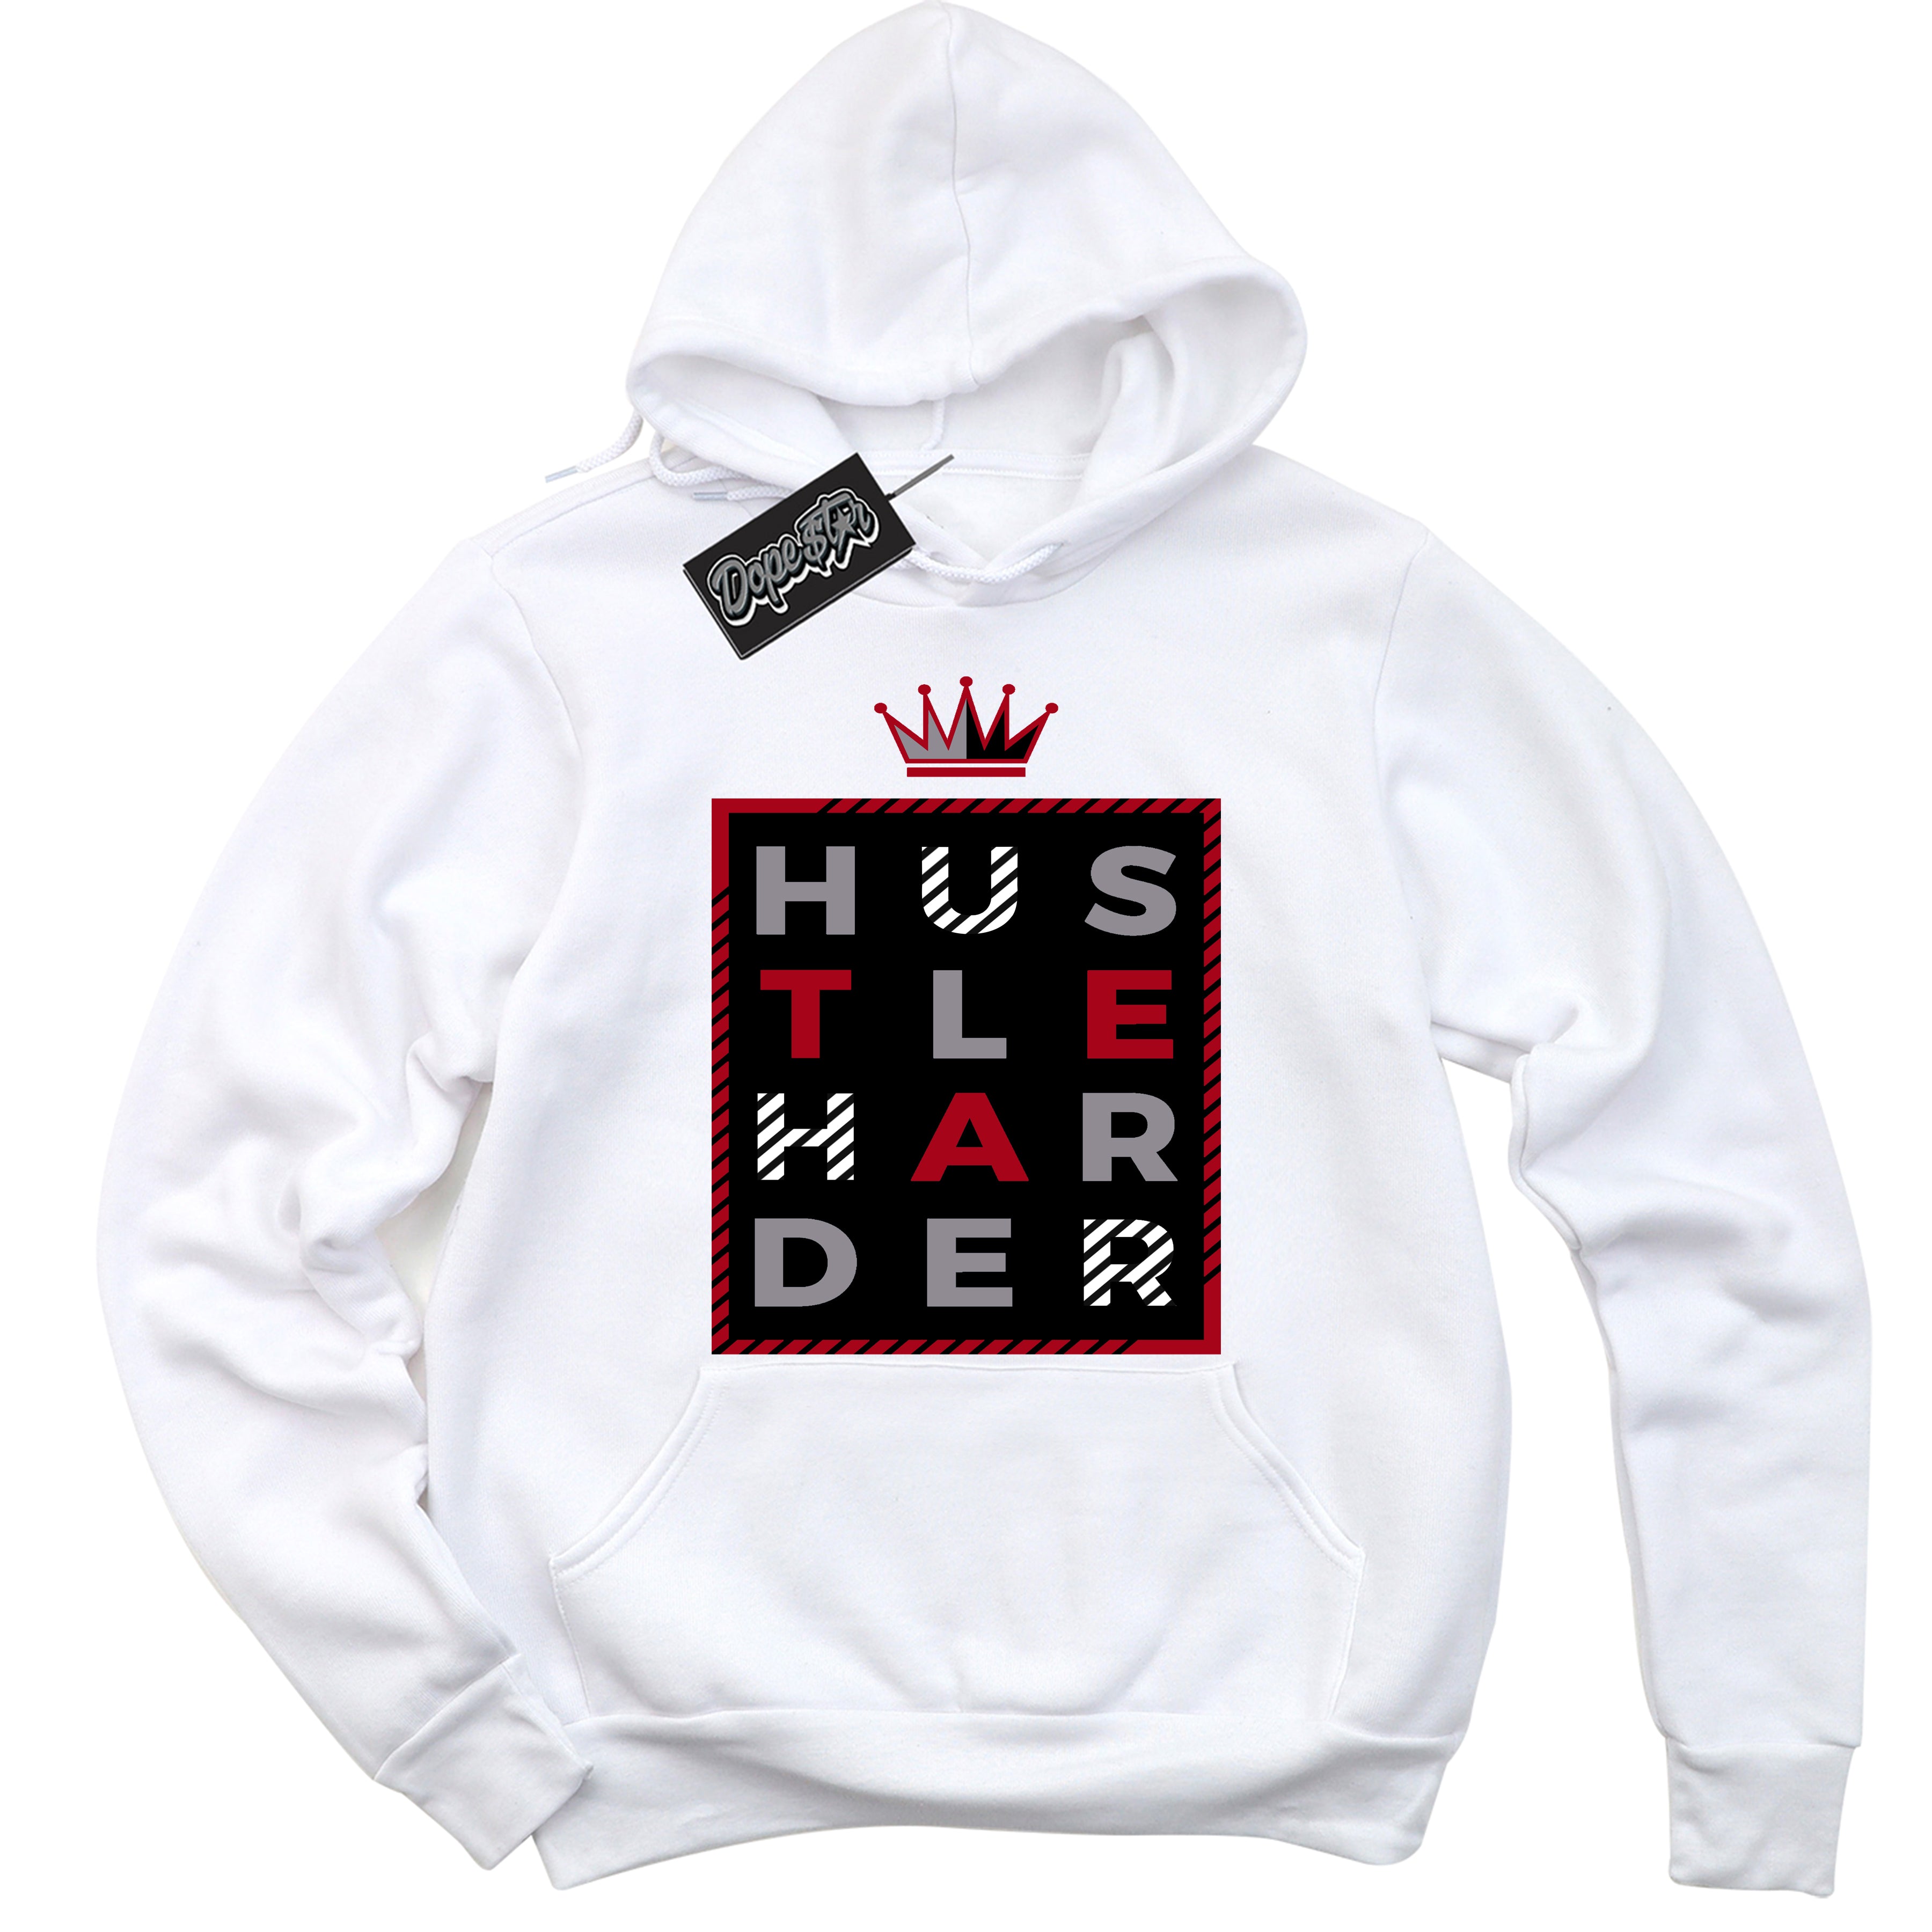 Cool White Hoodie with “ Hustle Harder ”  design that Perfectly Matches Bred Reimagined 4s Jordans.